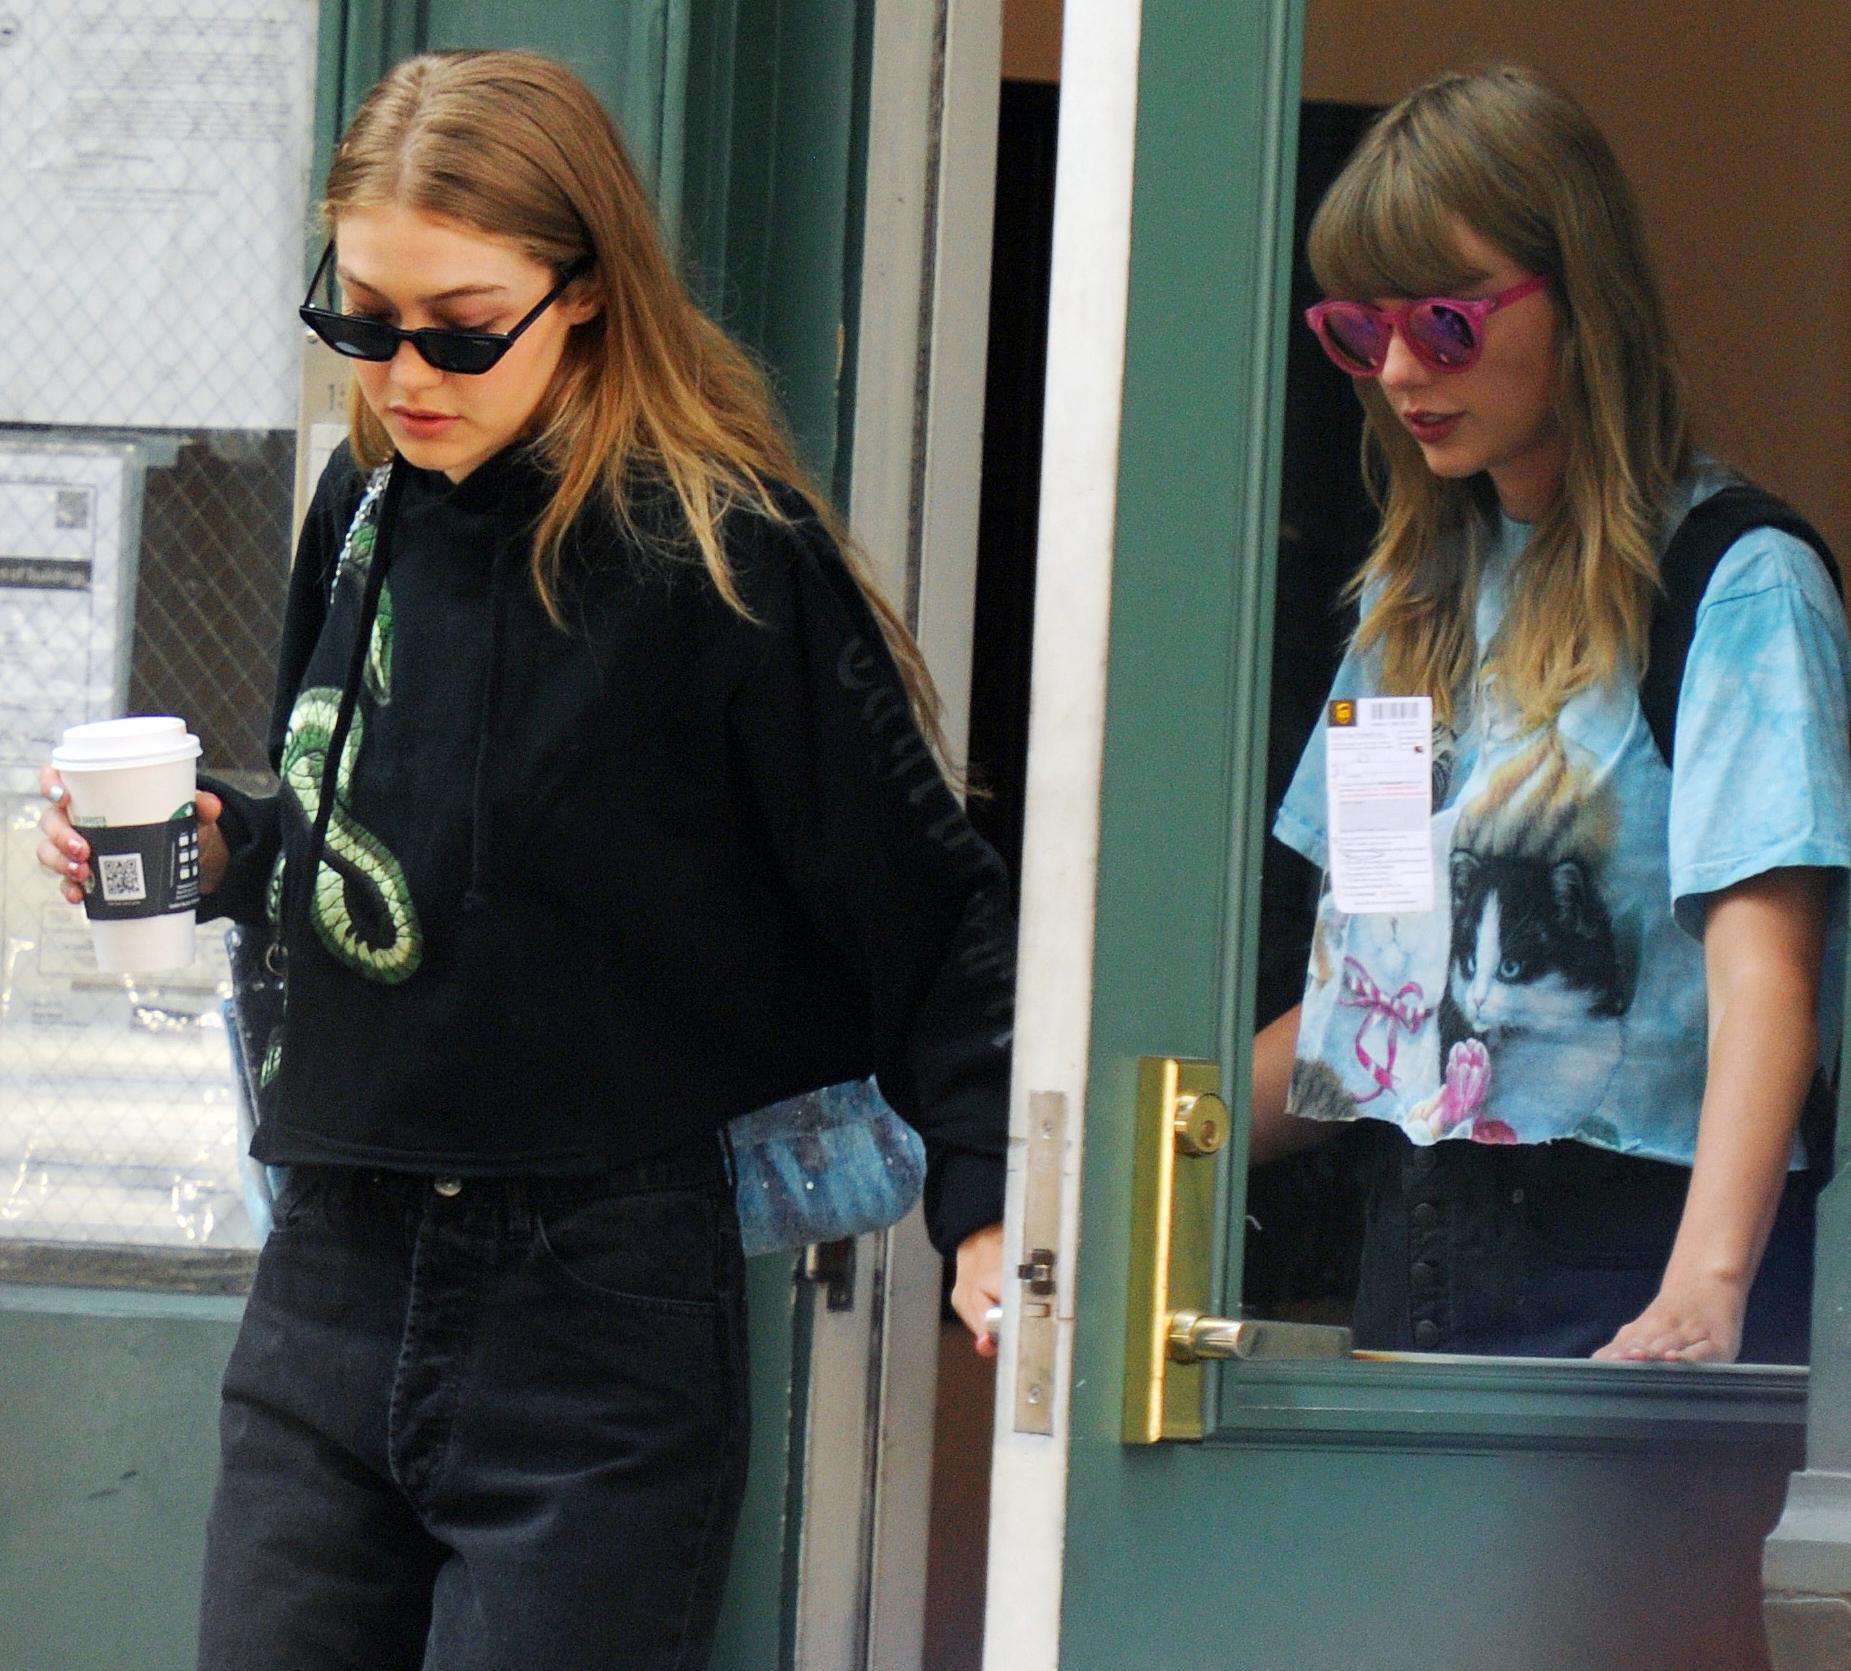 Taylor Swift and Gigi Hadid reunite as they seen leaving Taylor's Tribeca apartment after a sleep over and heading to Philadelphia for "Reputation" tour concert